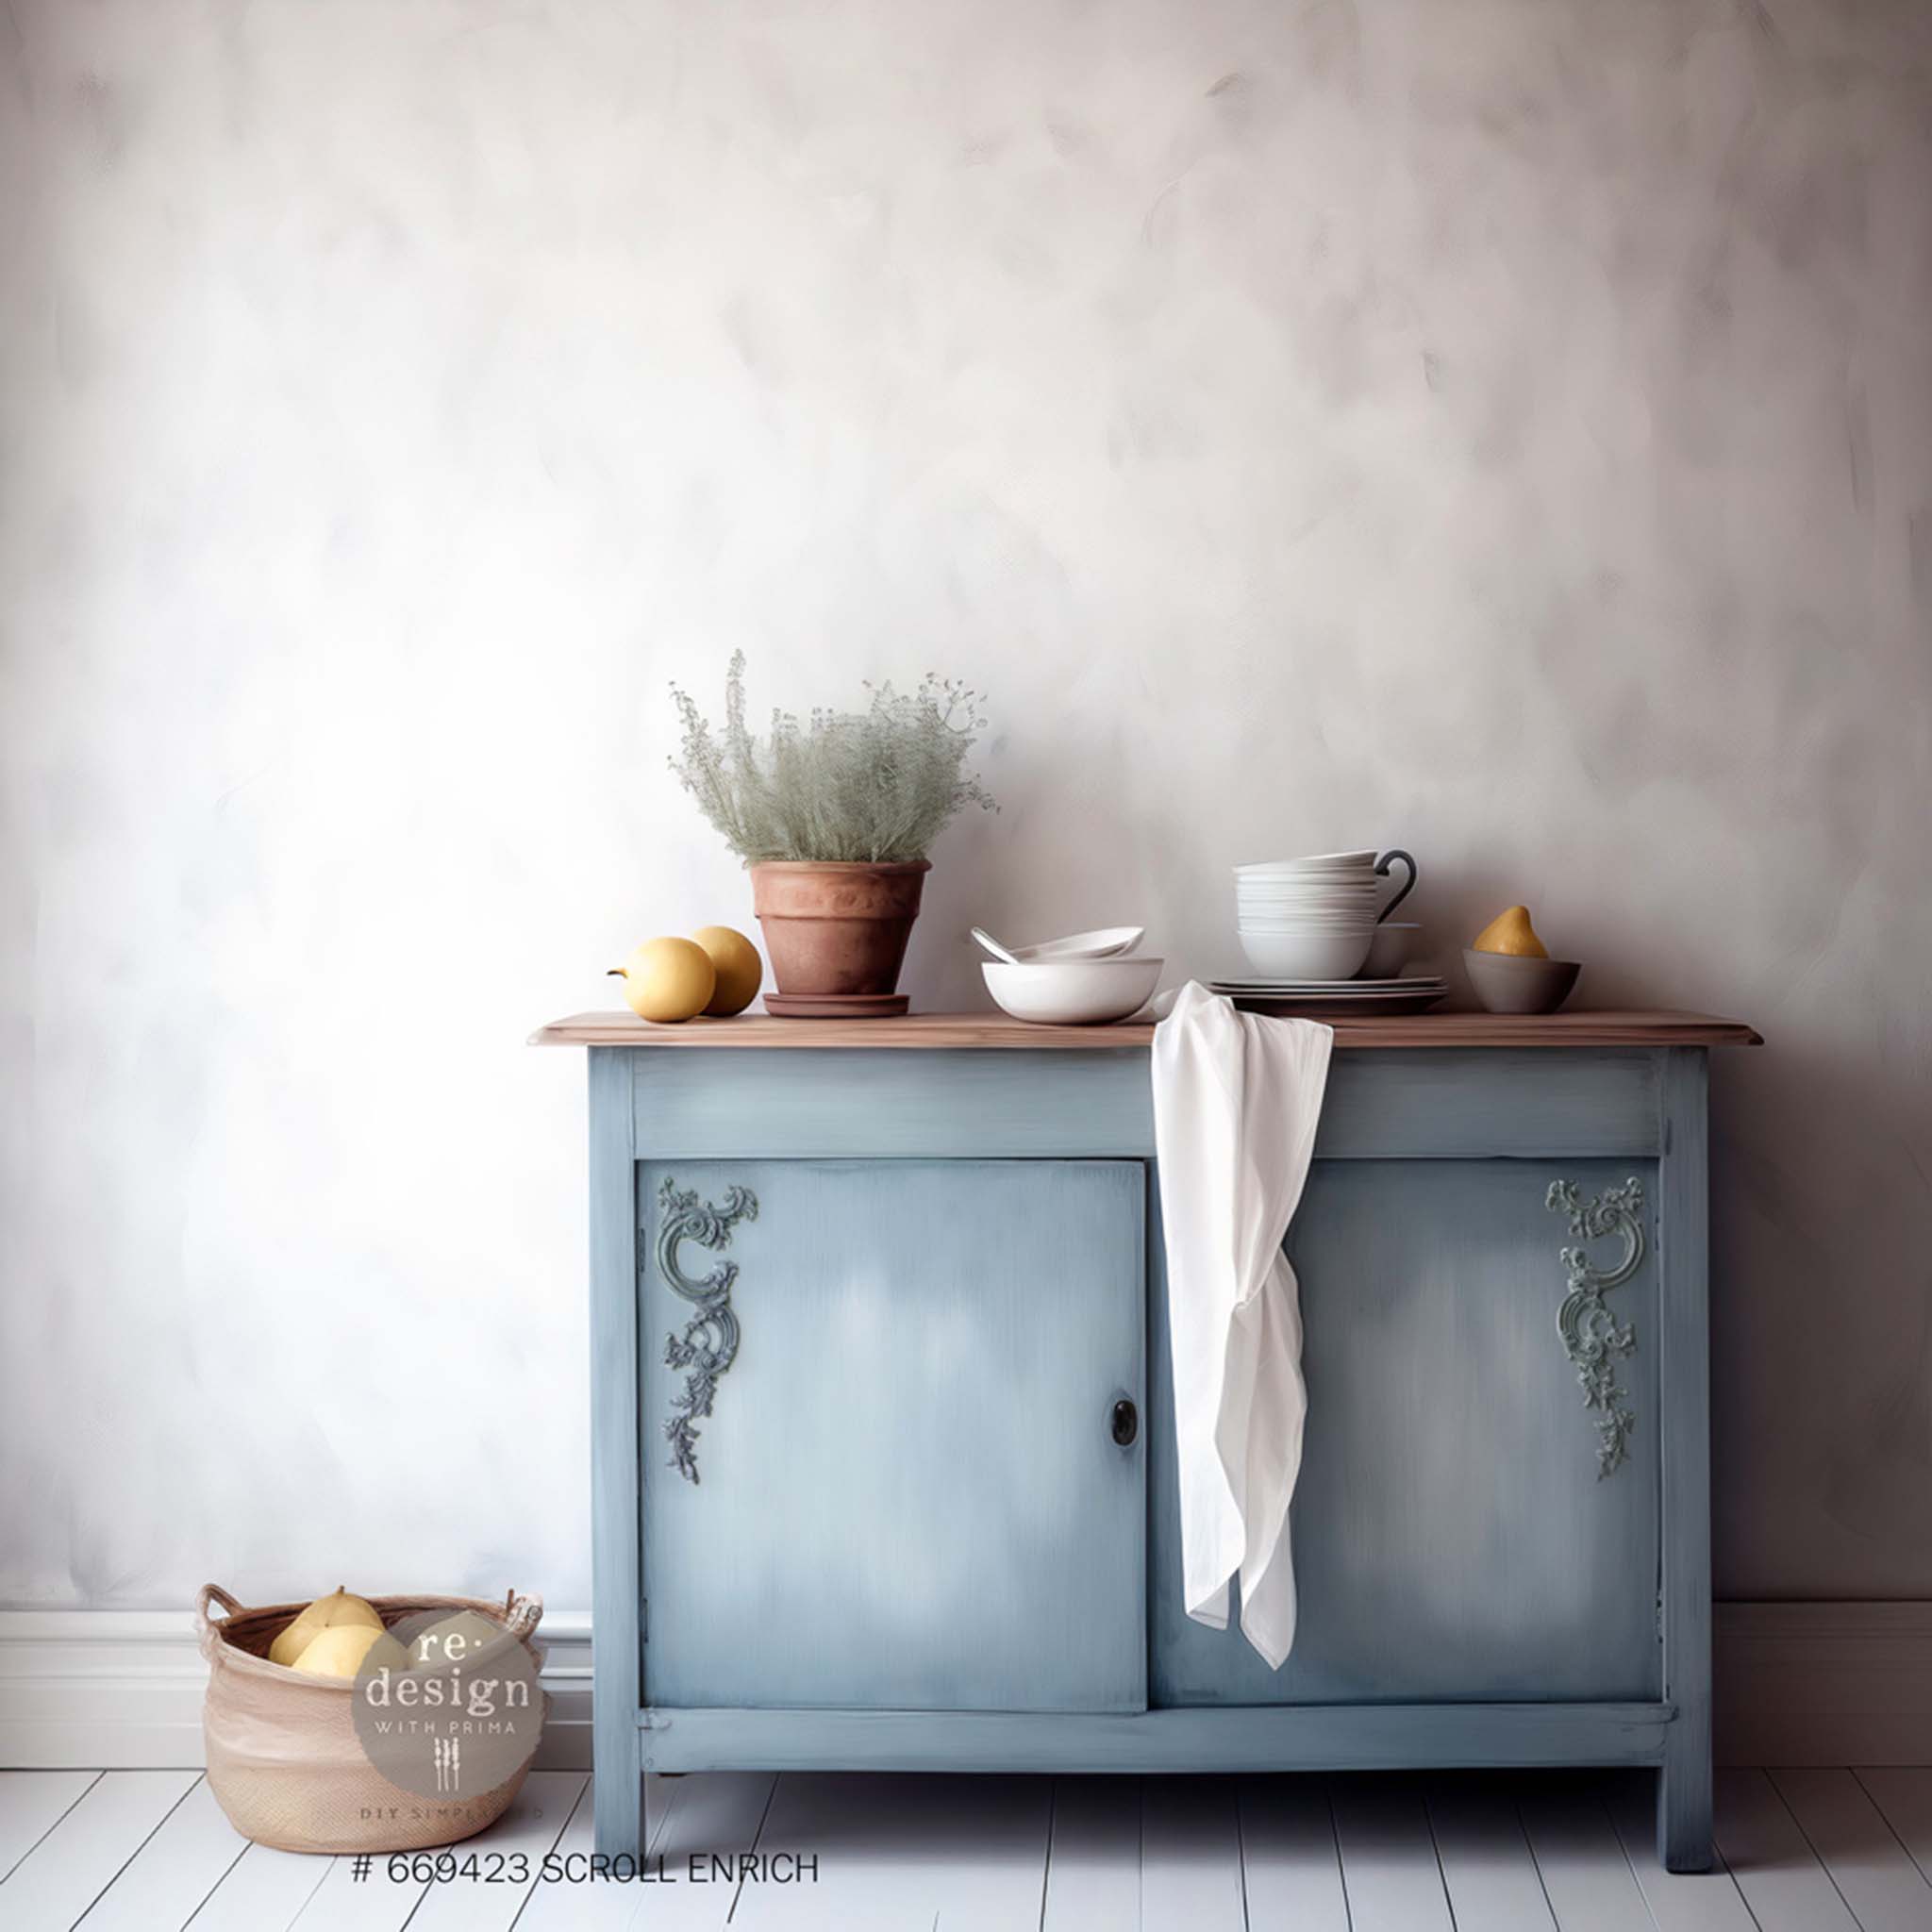 A small buffet table is painted light blue and features ReDesign with Prima's Scroll Enrich Decor Poly Casting on the outer top corners of its 2 doors.